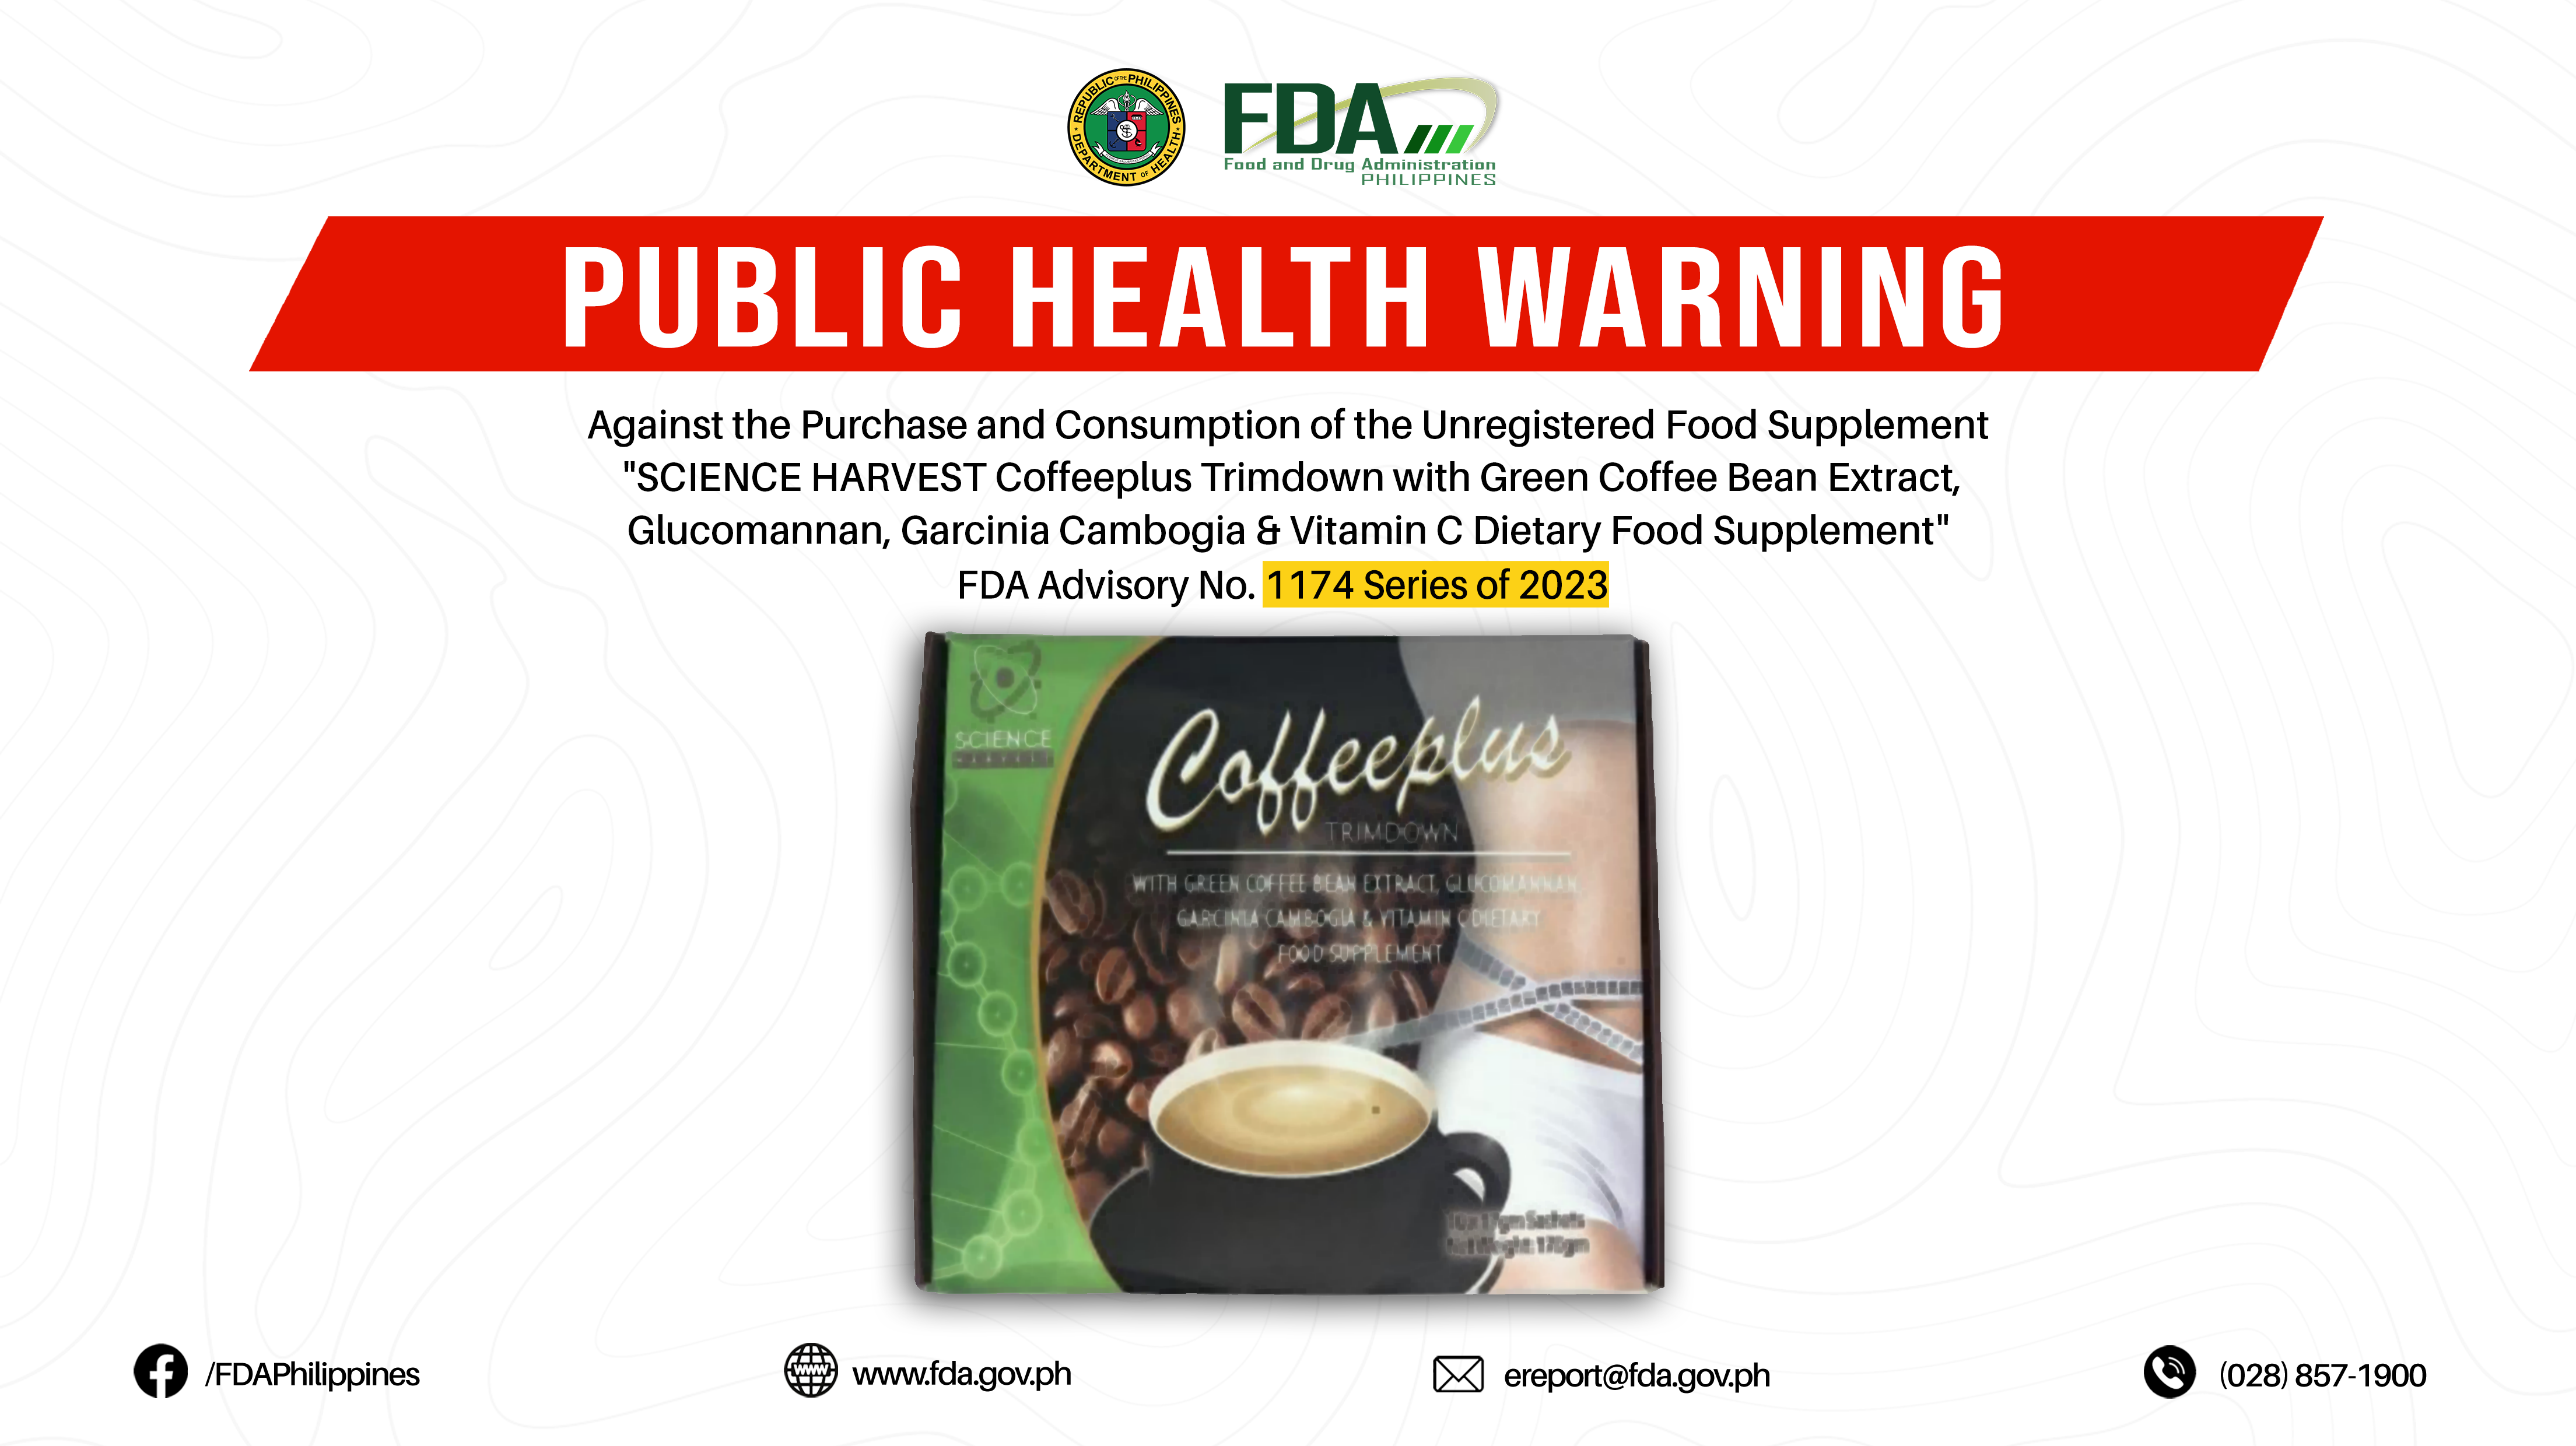 FDA Advisory No.2023-1174 || Public Health Warning Against the Purchase and Consumption of the Unregistered Food Supplement “SCIENCE HARVEST Coffeeplus Trimdown with Green Coffee Bean Extract, Glucomannan, Garcinia Cambogia & Vitamin C Dietary Food Supplement”